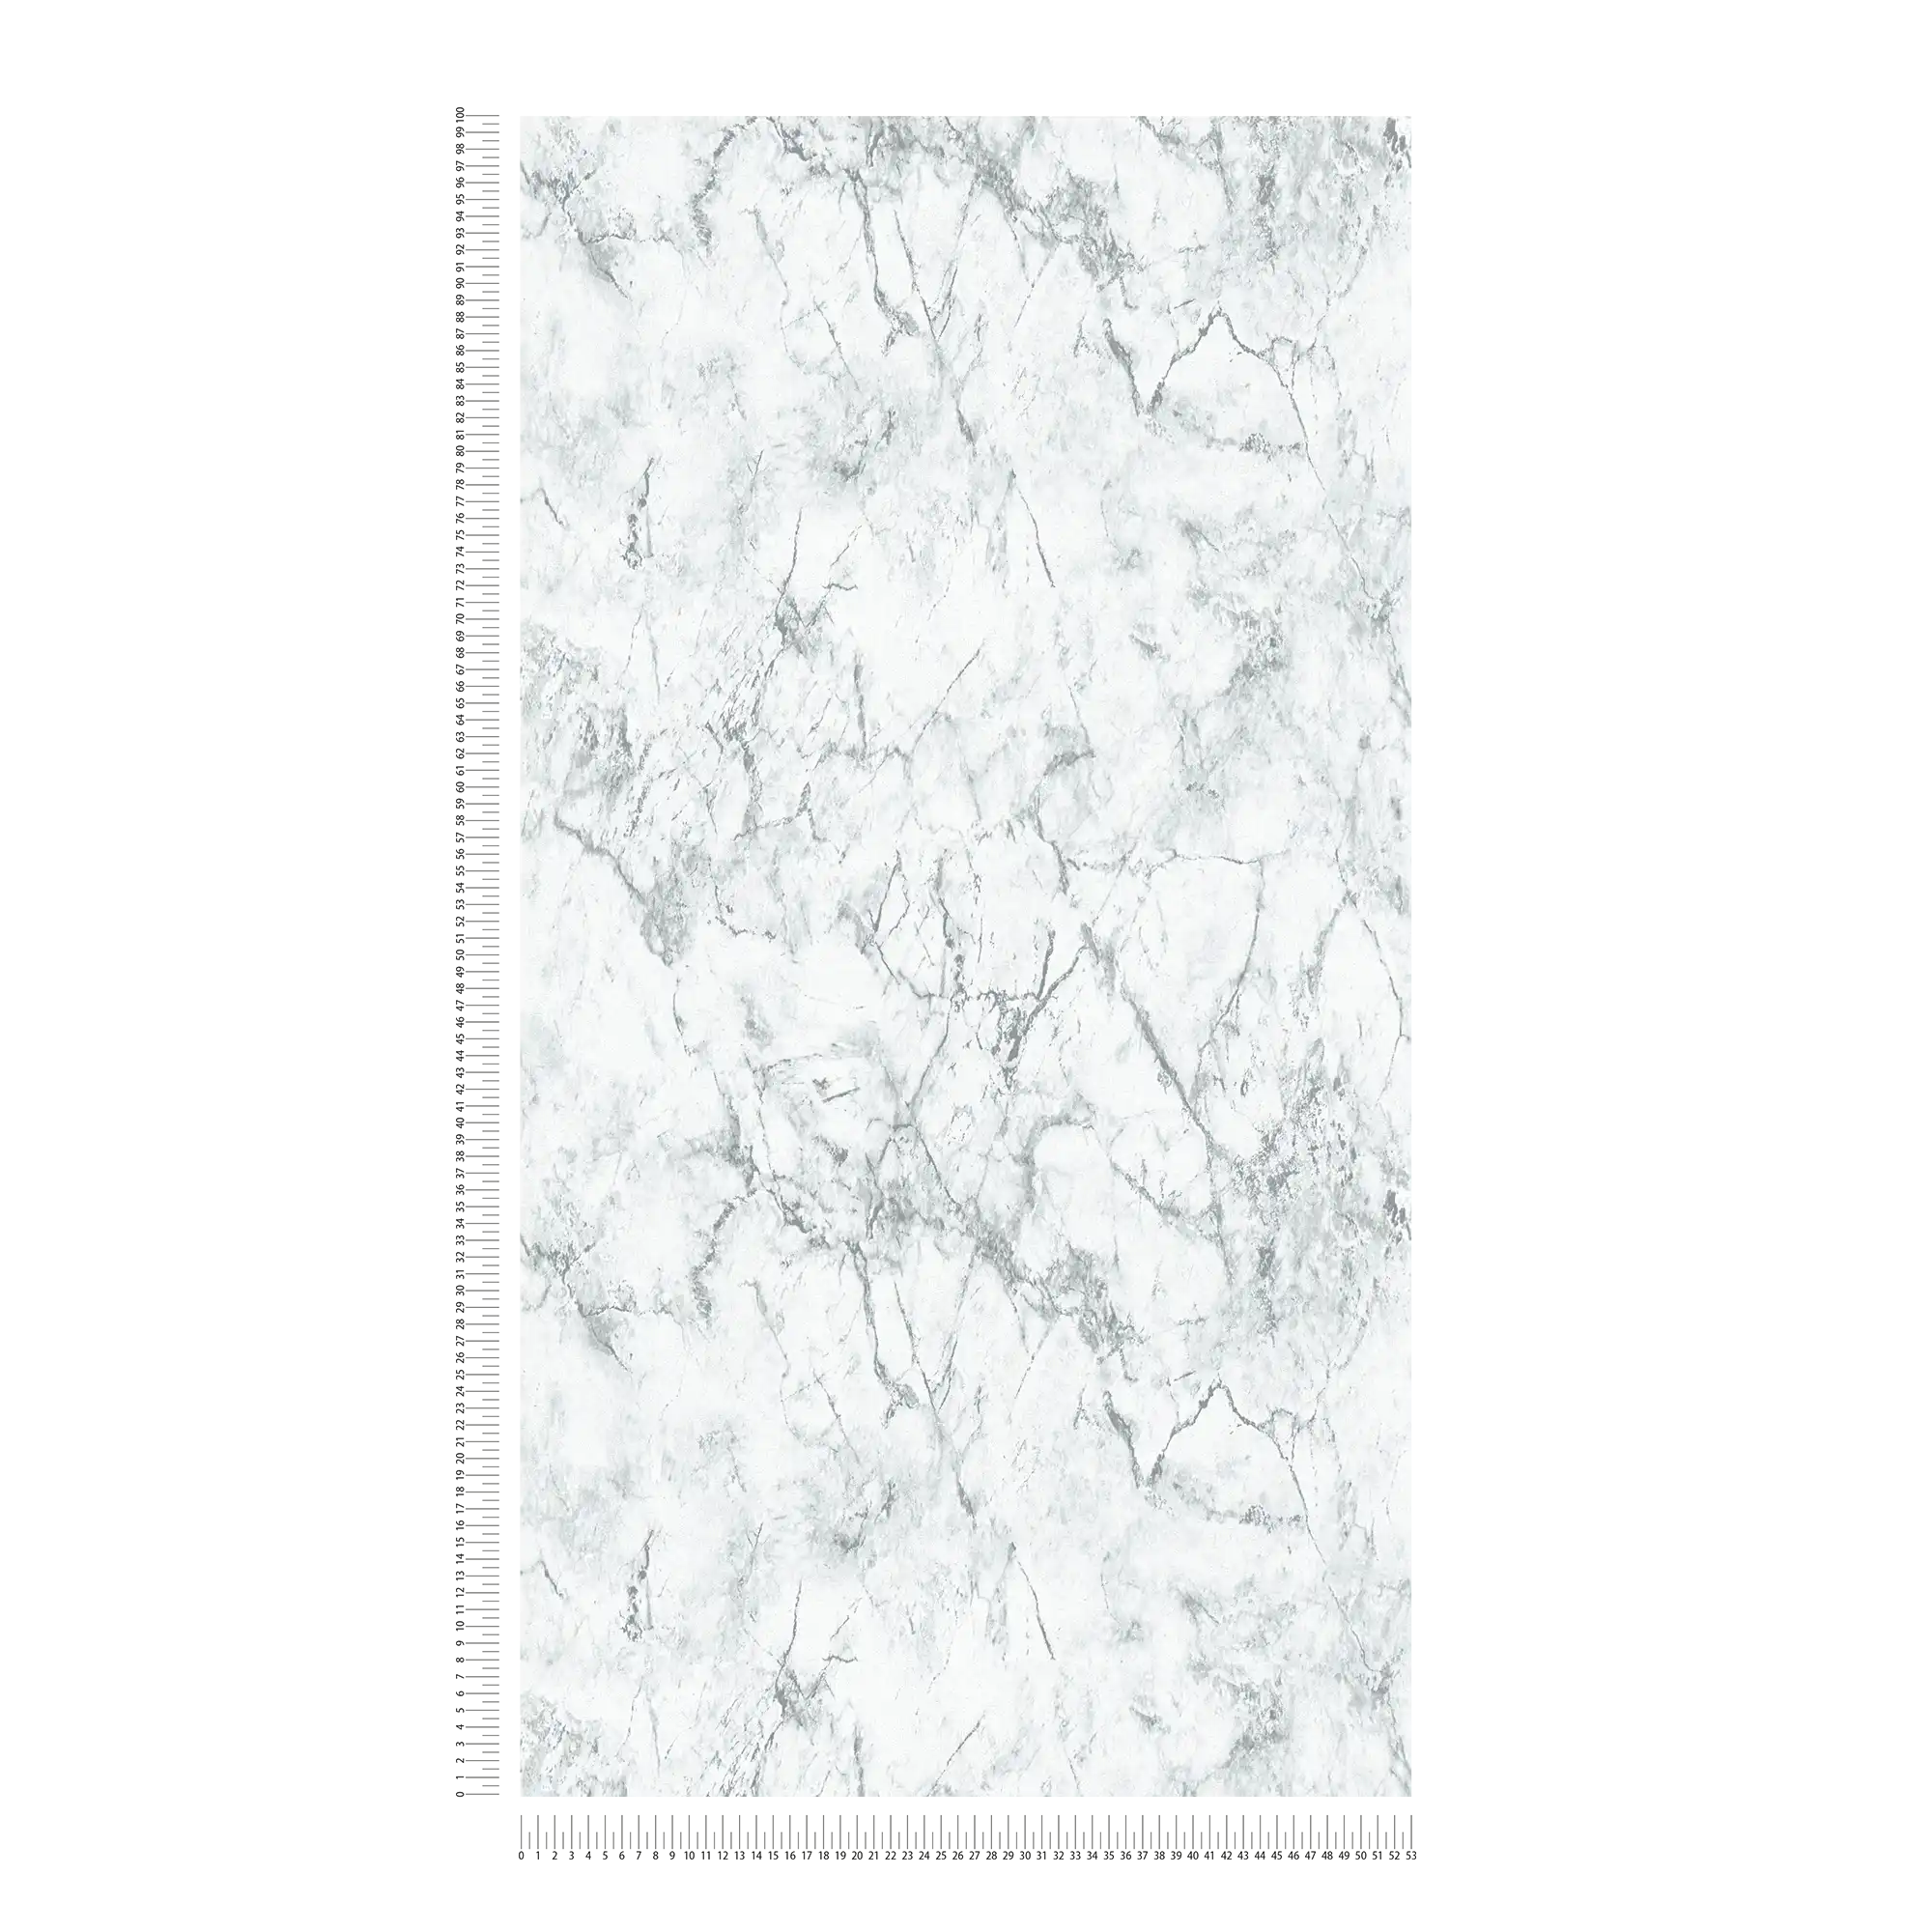             Non-woven wallpaper with fine marble look - white, grey
        